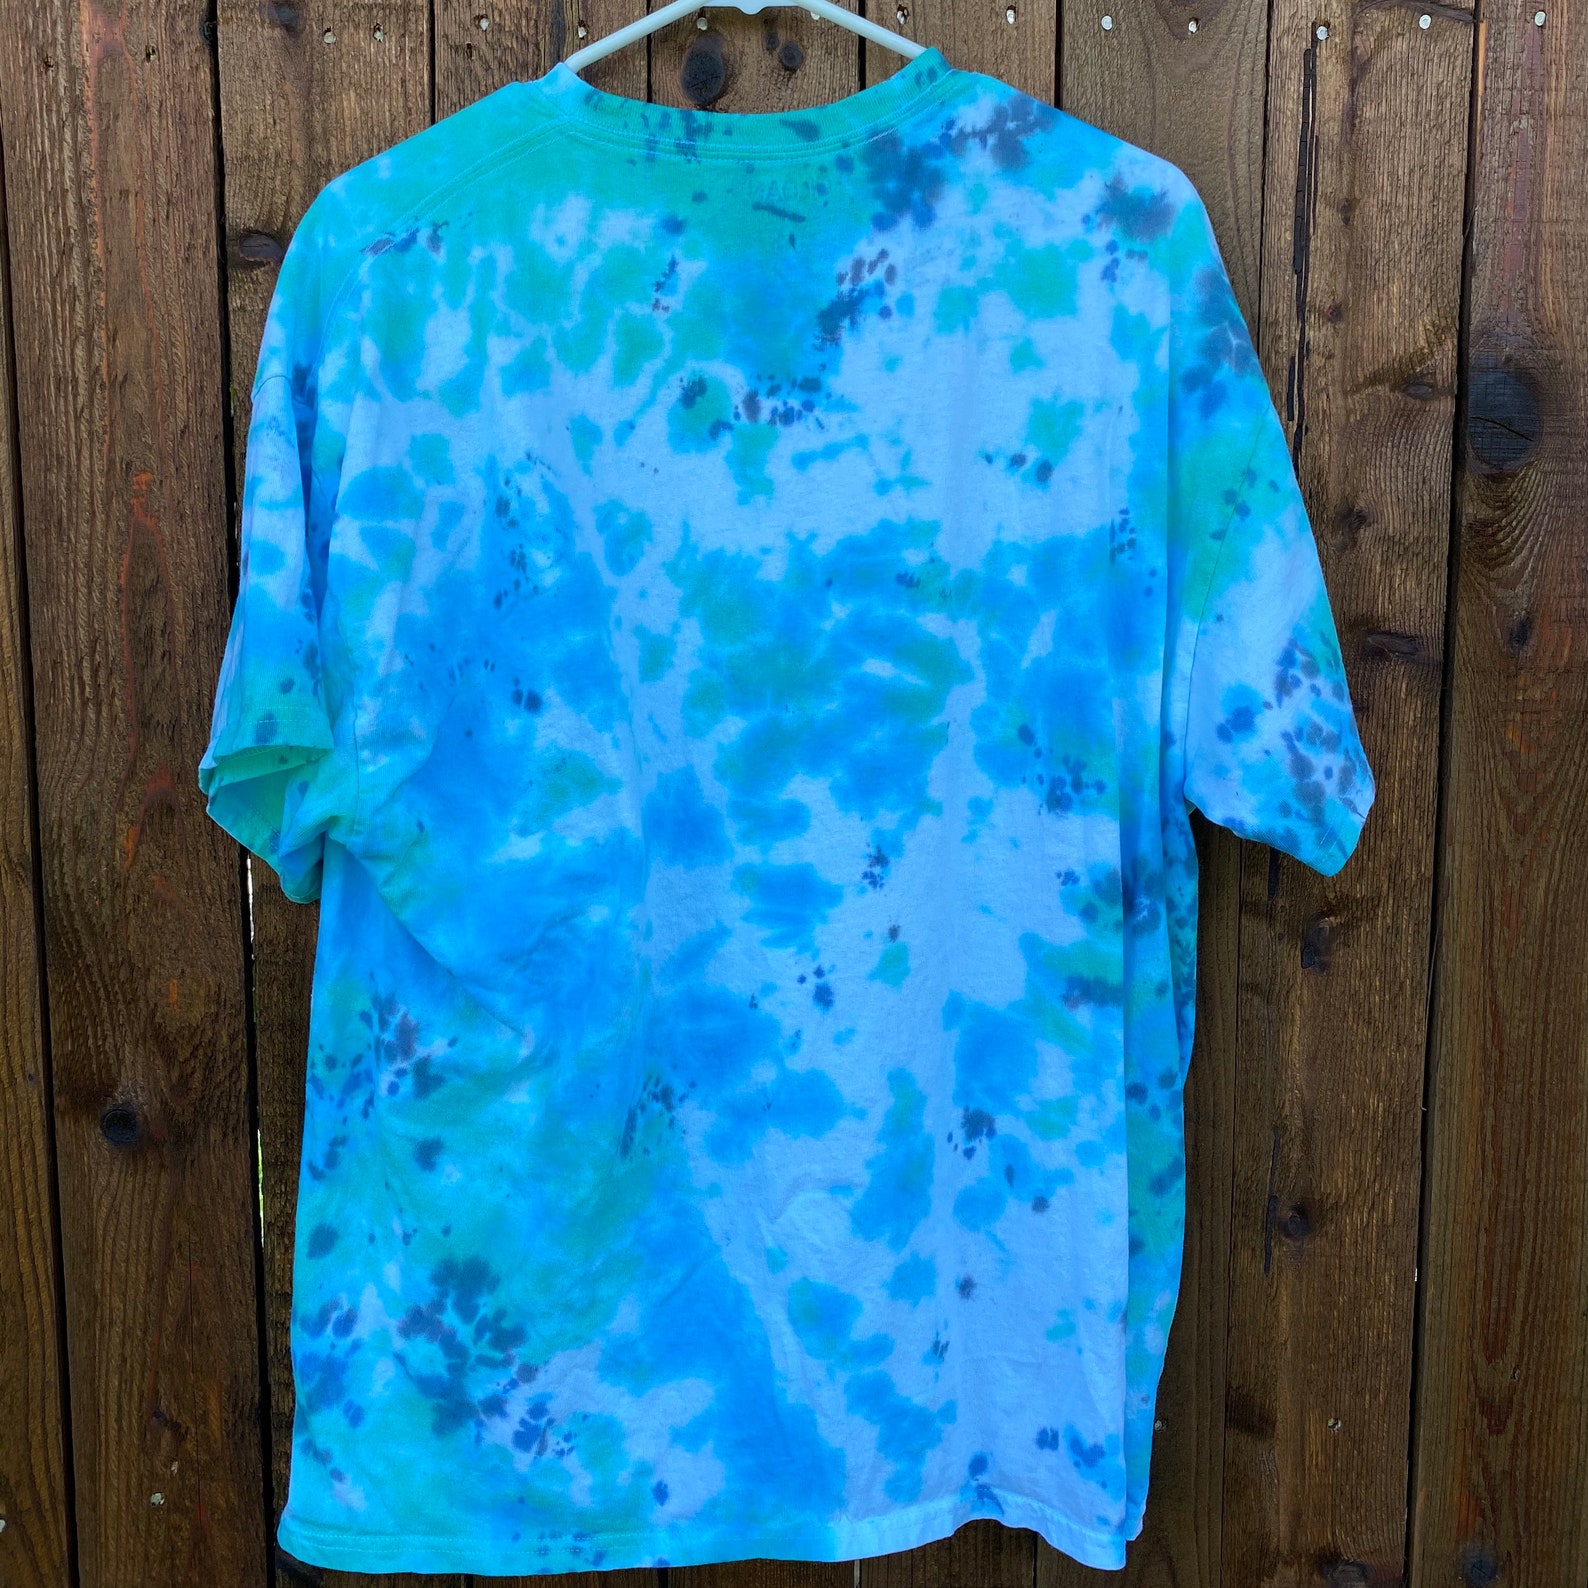 Blue and Green Tie-Dye XL Short-Sleeve Oversized Shirt | Etsy